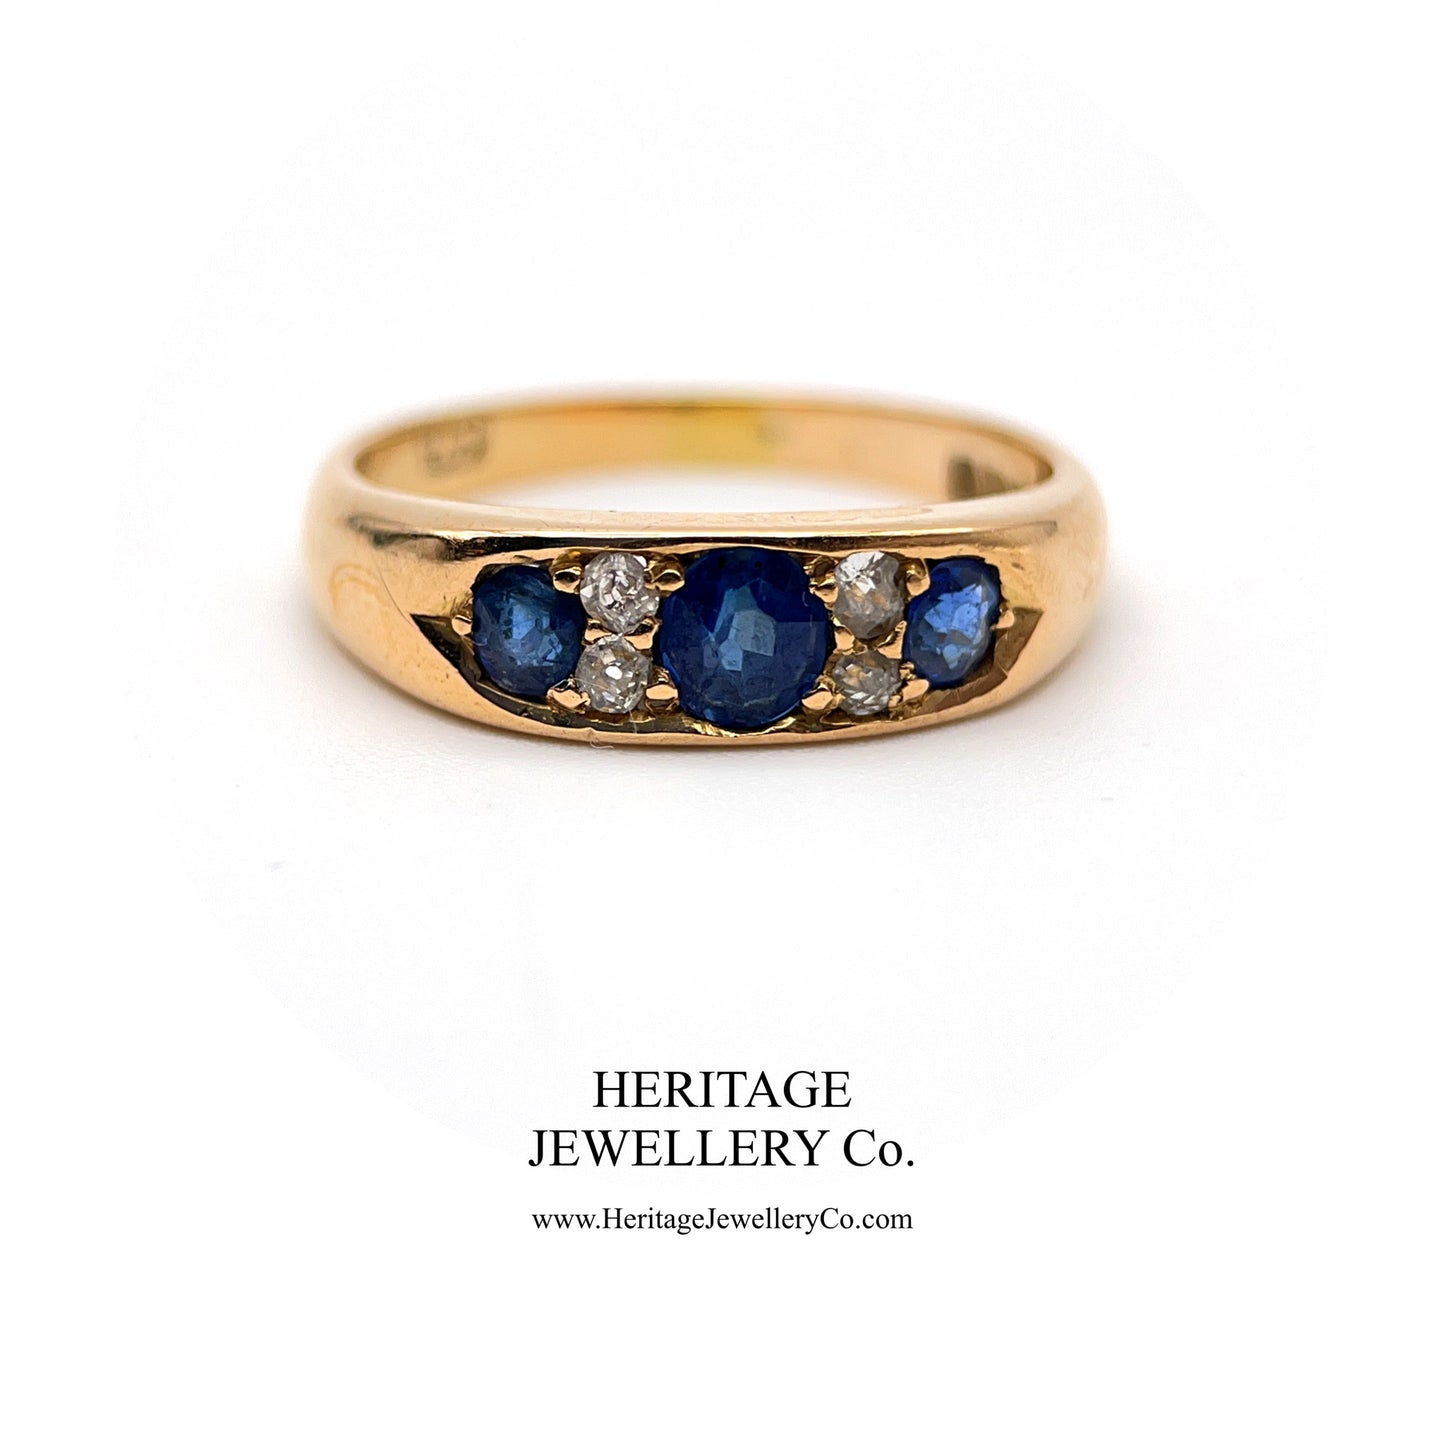 Antique Gold, Sapphire and Diamond 7-stone Ring (18ct gold; c.1902)